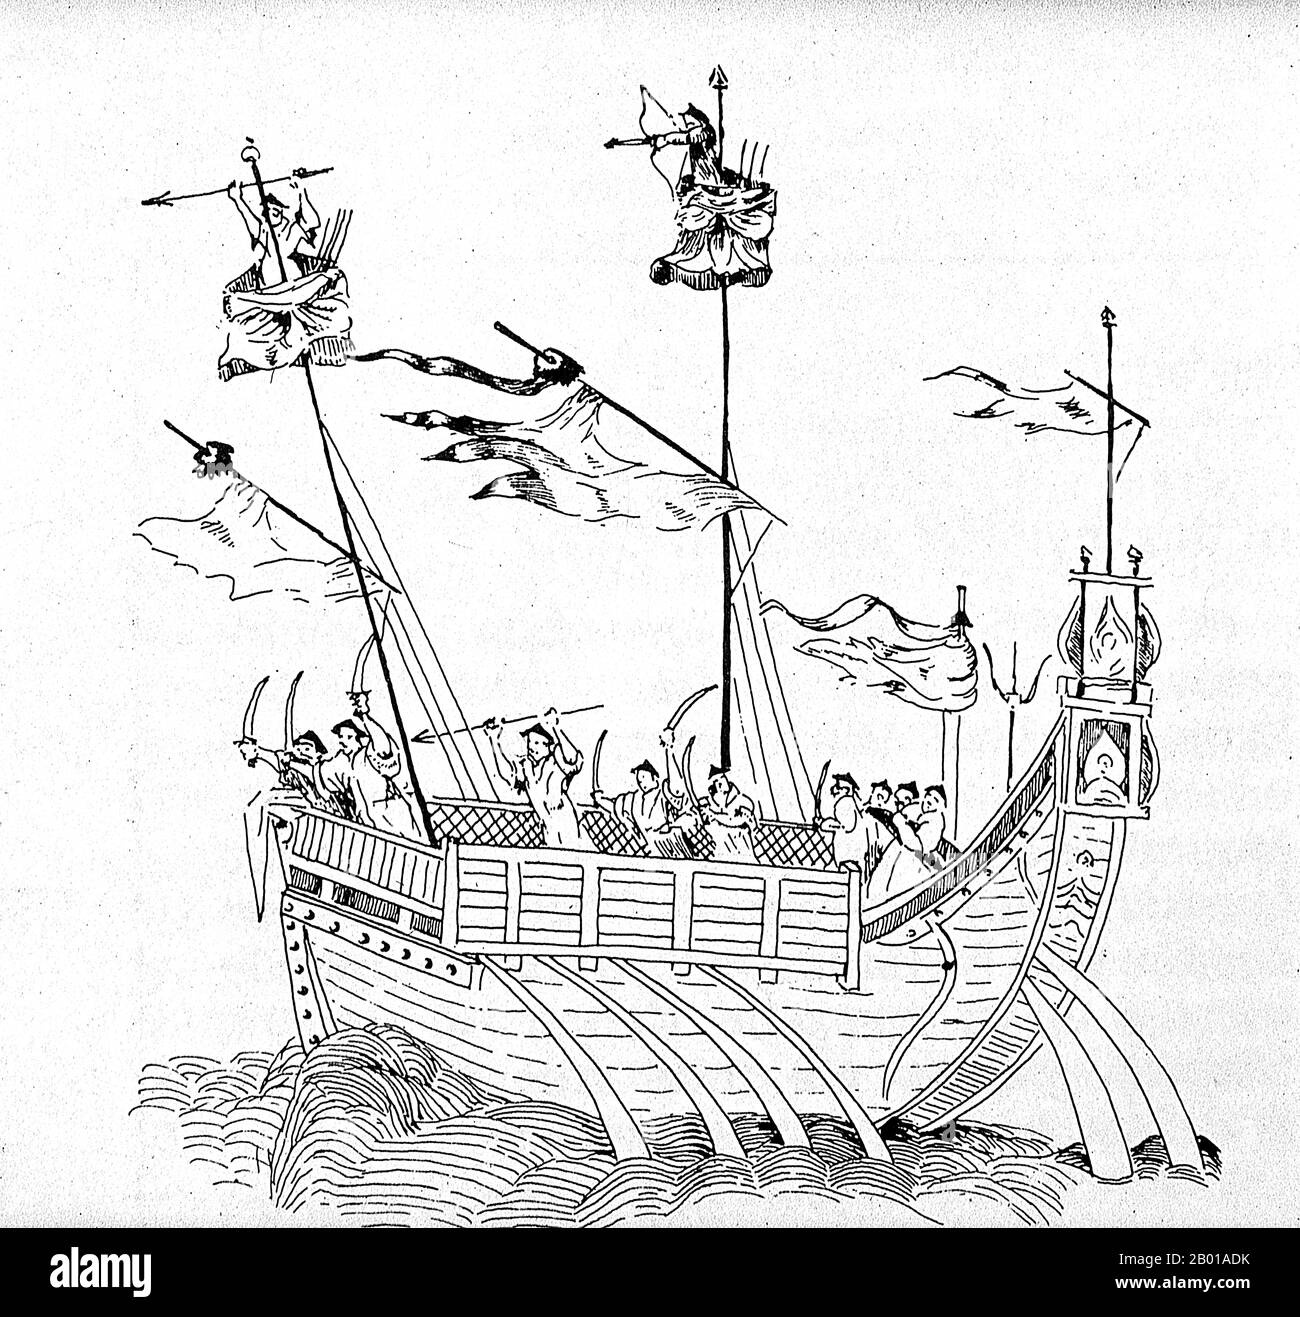 China: A two-masted Ming Dynasty war junk, c. early 17th century.  A junk is an ancient Chinese sailing vessel design still in use today. Junks were developed during the Han Dynasty (206 BCE – 220 CE) and were used as sea-going vessels as early as the 2nd century CE. They evolved in the later dynasties, and were used throughout Asia for extensive ocean voyages. They were found, and in lesser numbers are still found, throughout Southeast Asia and India, but primarily in China, perhaps most famously in Hong Kong. Stock Photo